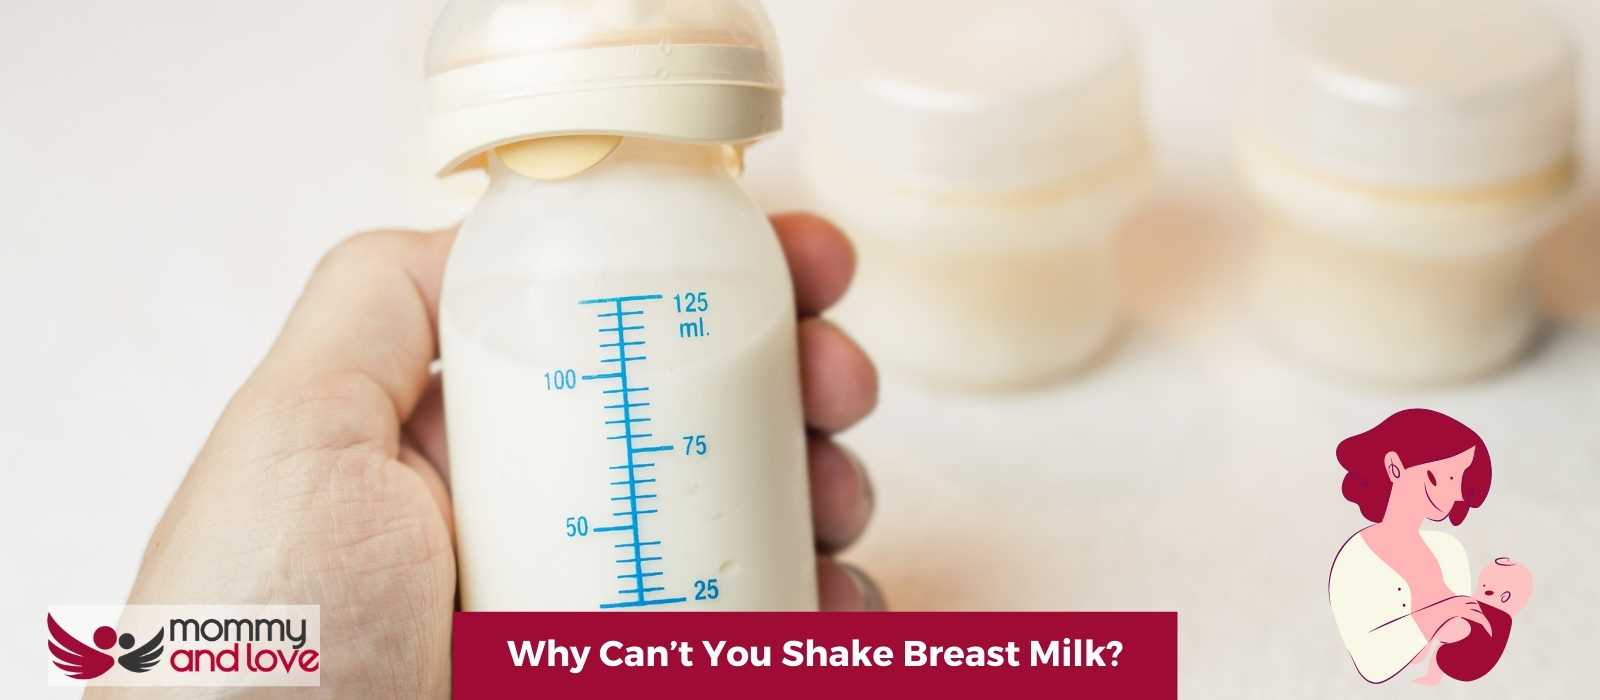 Why Can’t You Shake Breast Milk?